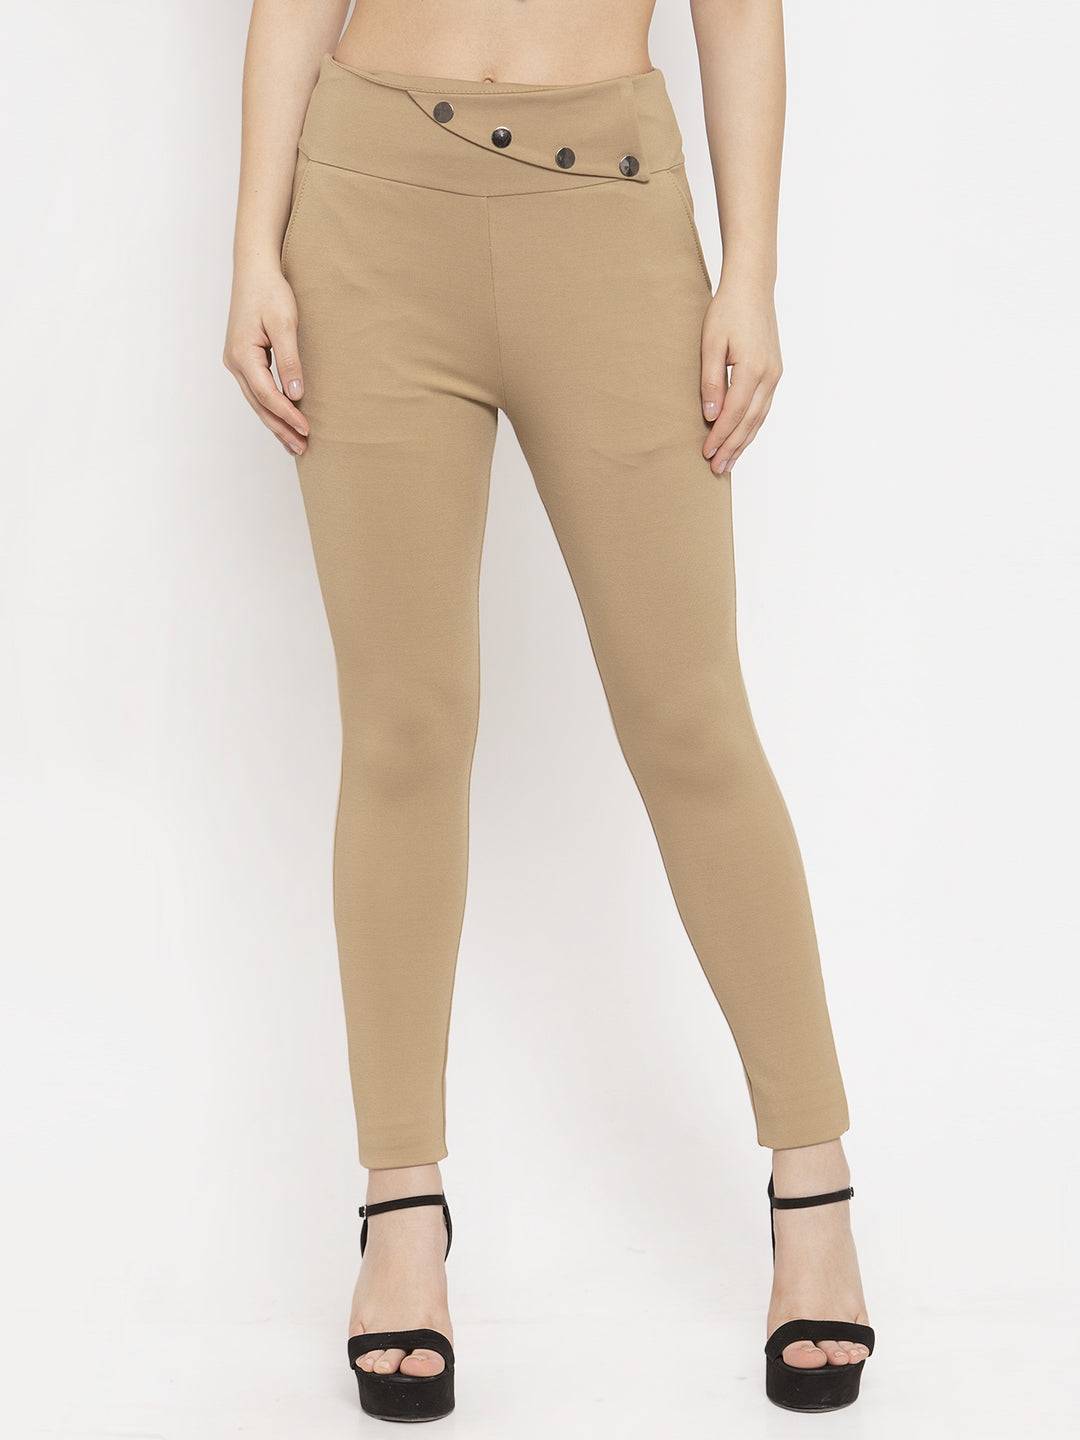 Women's Fawn Relaxed Fit Jeggings - Wahe-NOOR